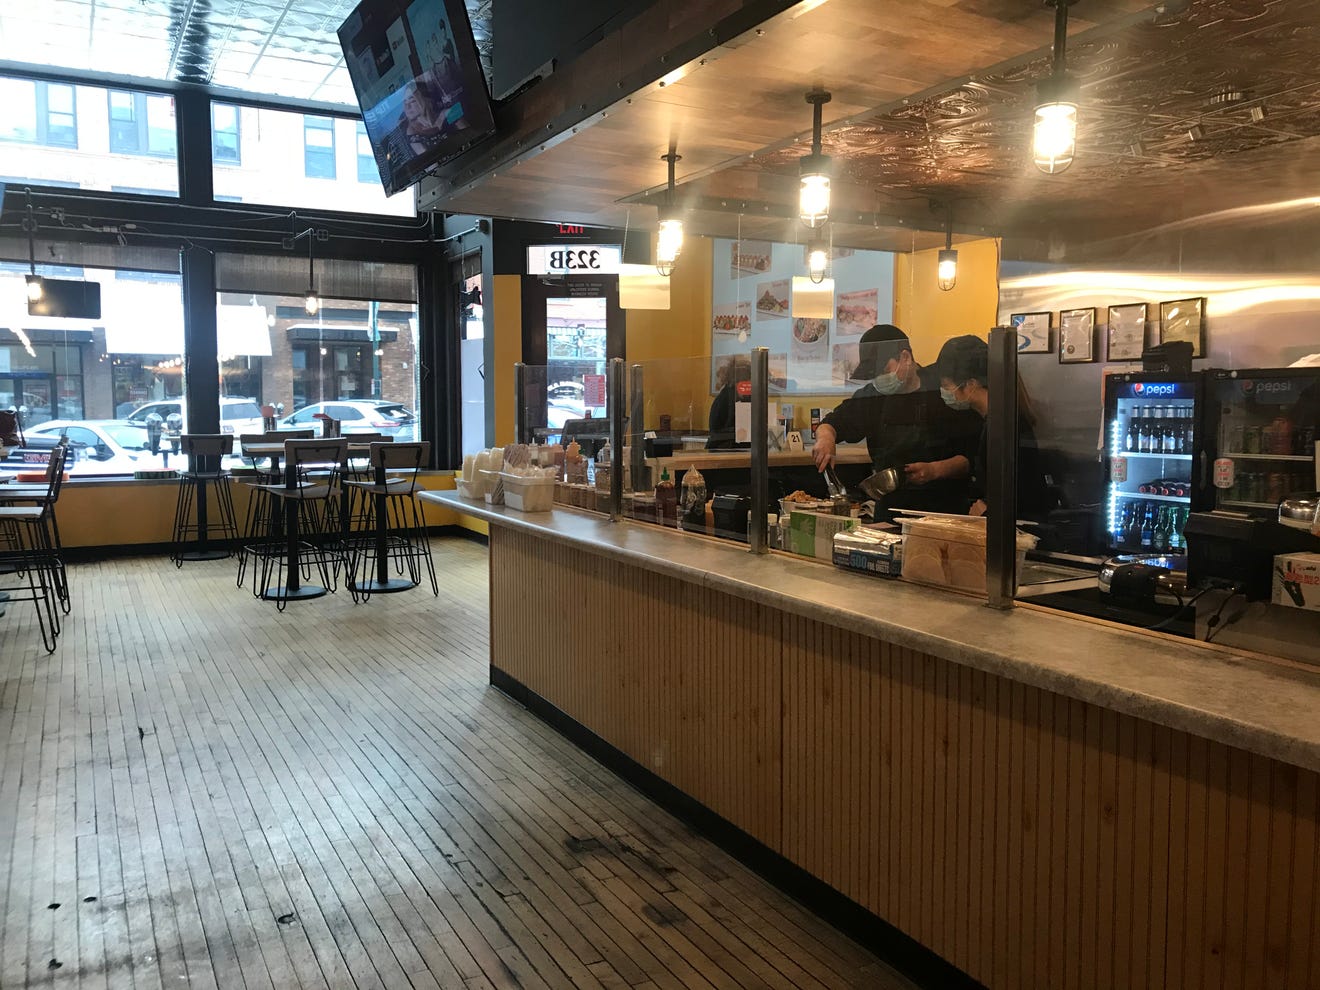 Sioux Falls adds 20 new restaurants in 2021